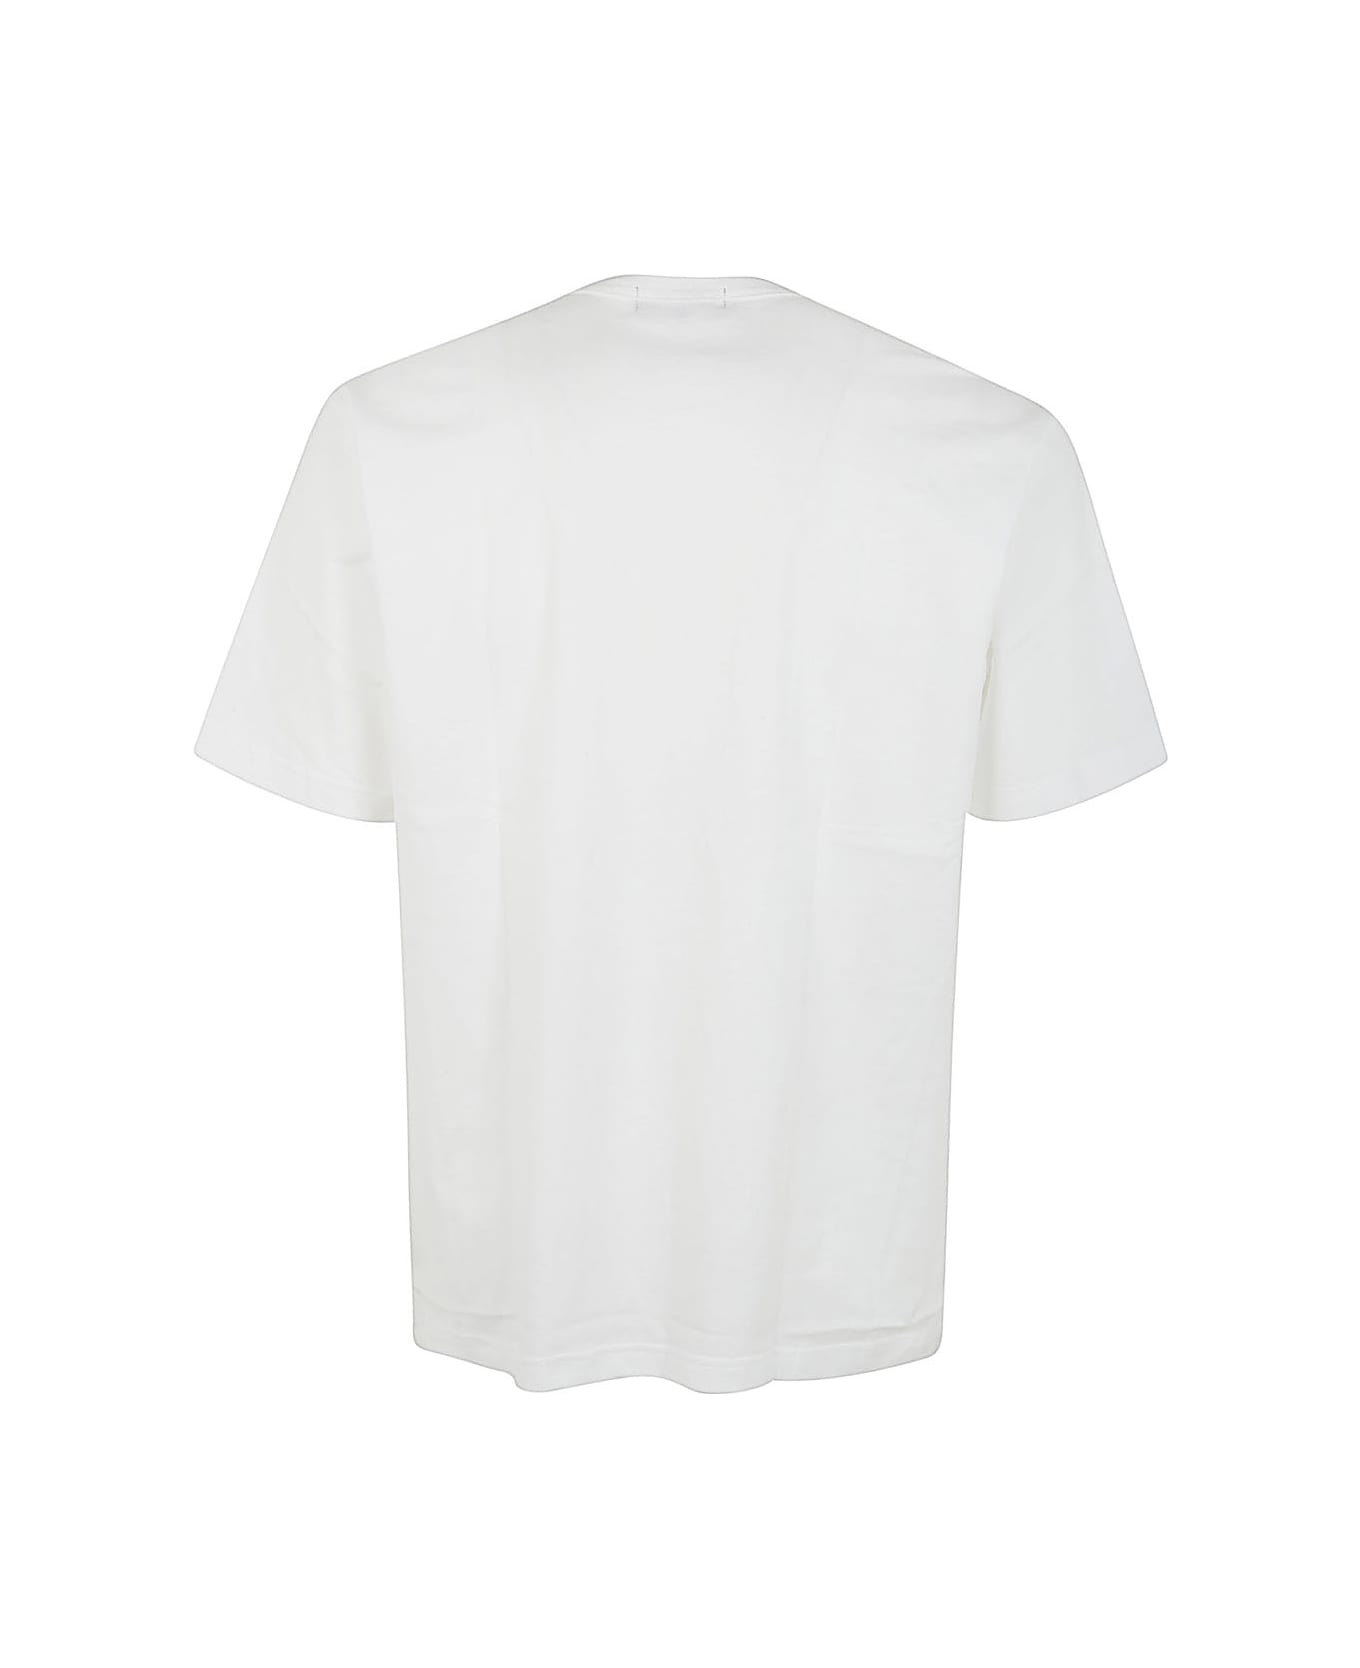 Comme des Garçons Homme Iconic T-shirt With Logo - White シャツ